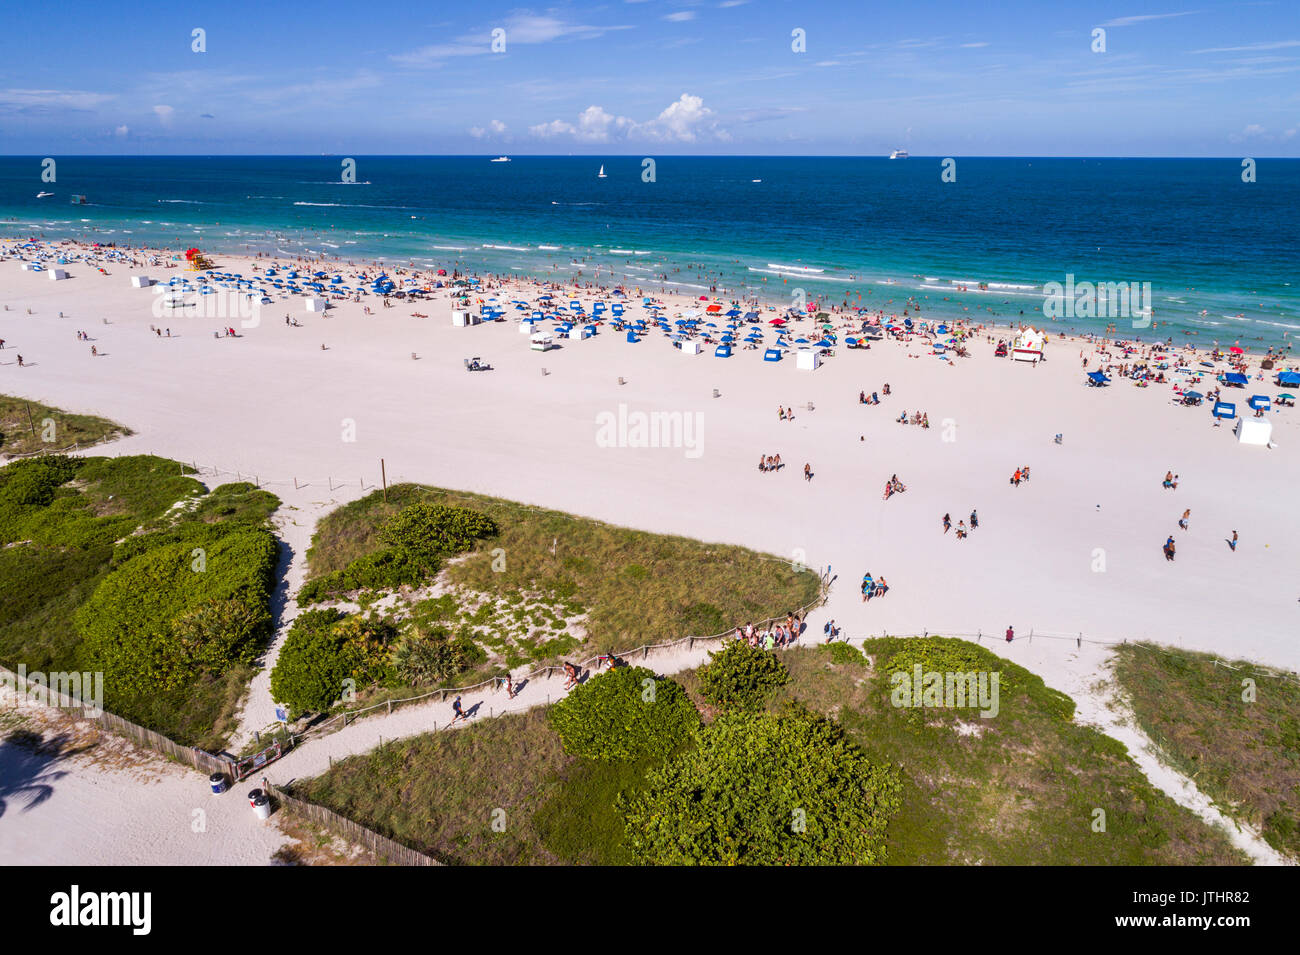 Miami Beach Florida,aerial overhead from above view,above,from above view,Atlantic Ocean,sand,sunbathers,FL17080601d Stock Photo